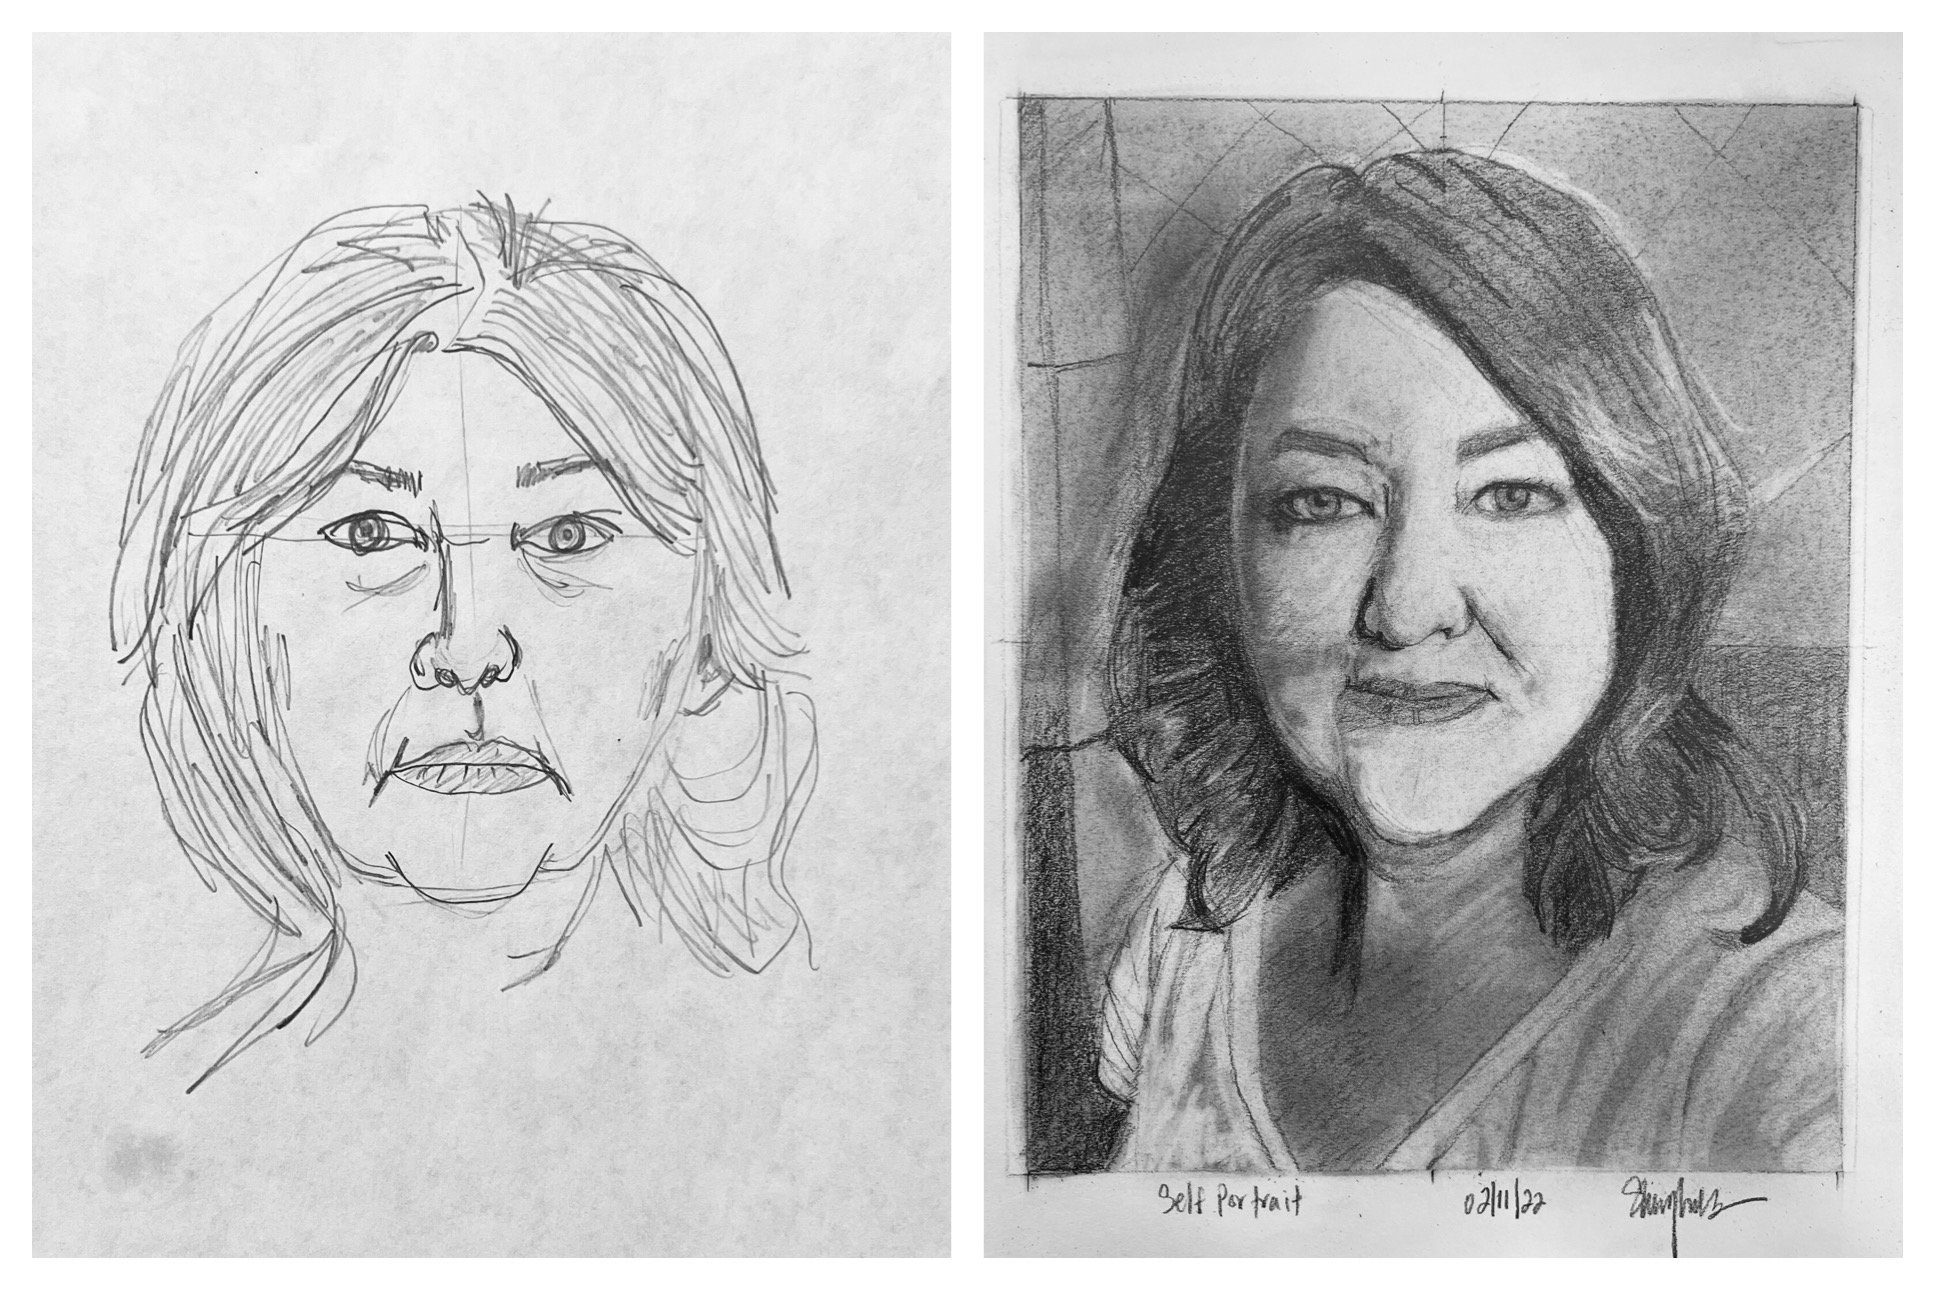 Sunny's Before and After Self-Portraits February 7-12, 2022